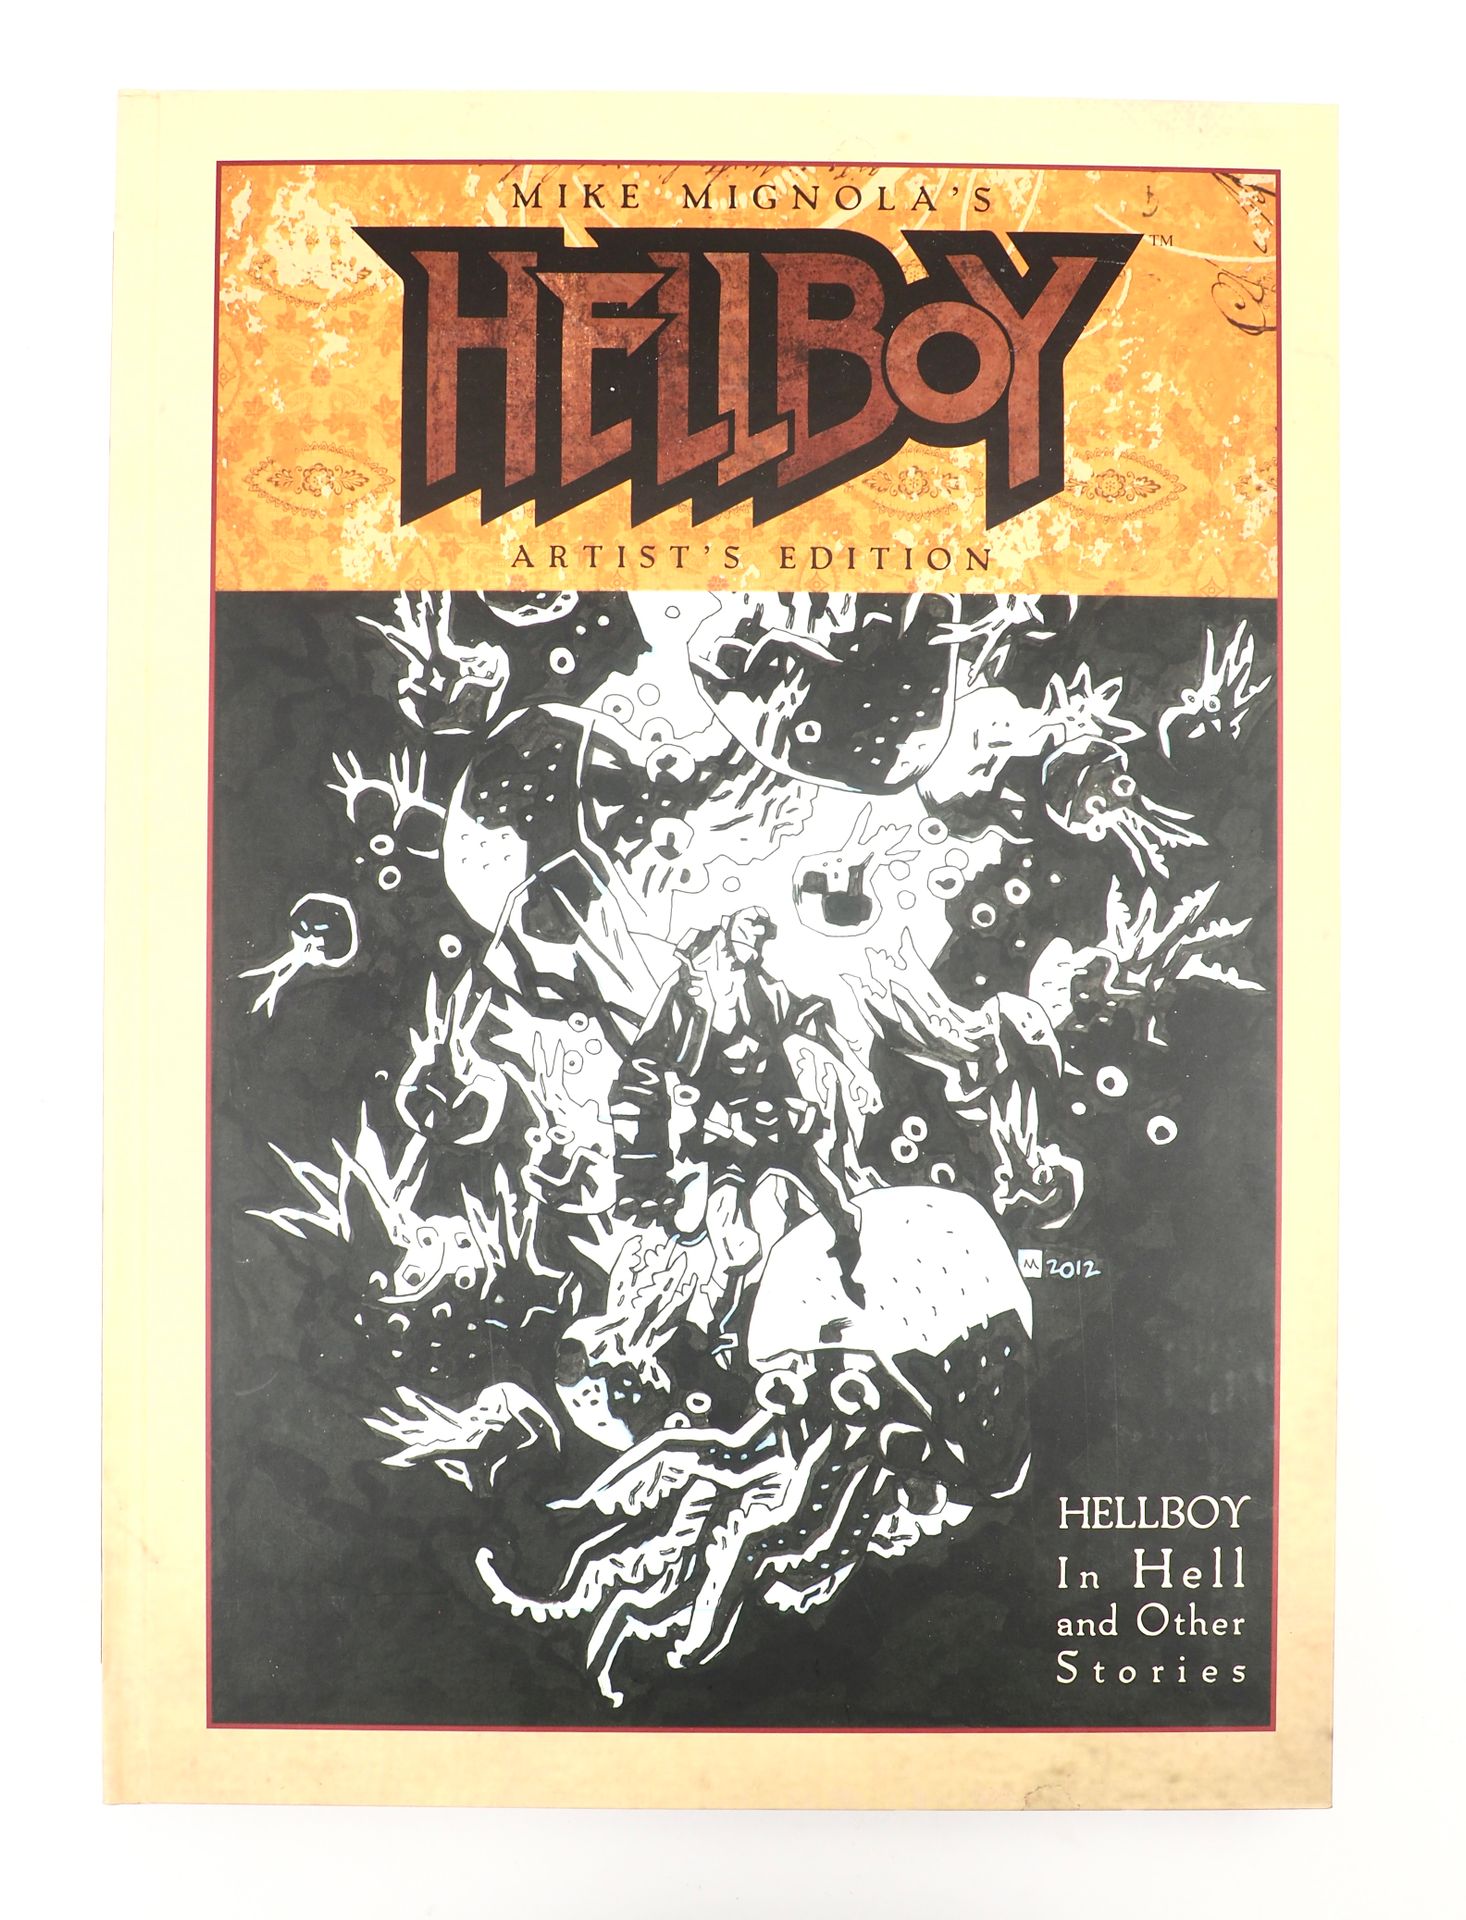 Null MIGNOLA Mike
Hellboy
Large format Artist's edition published by IDW
Good co&hellip;